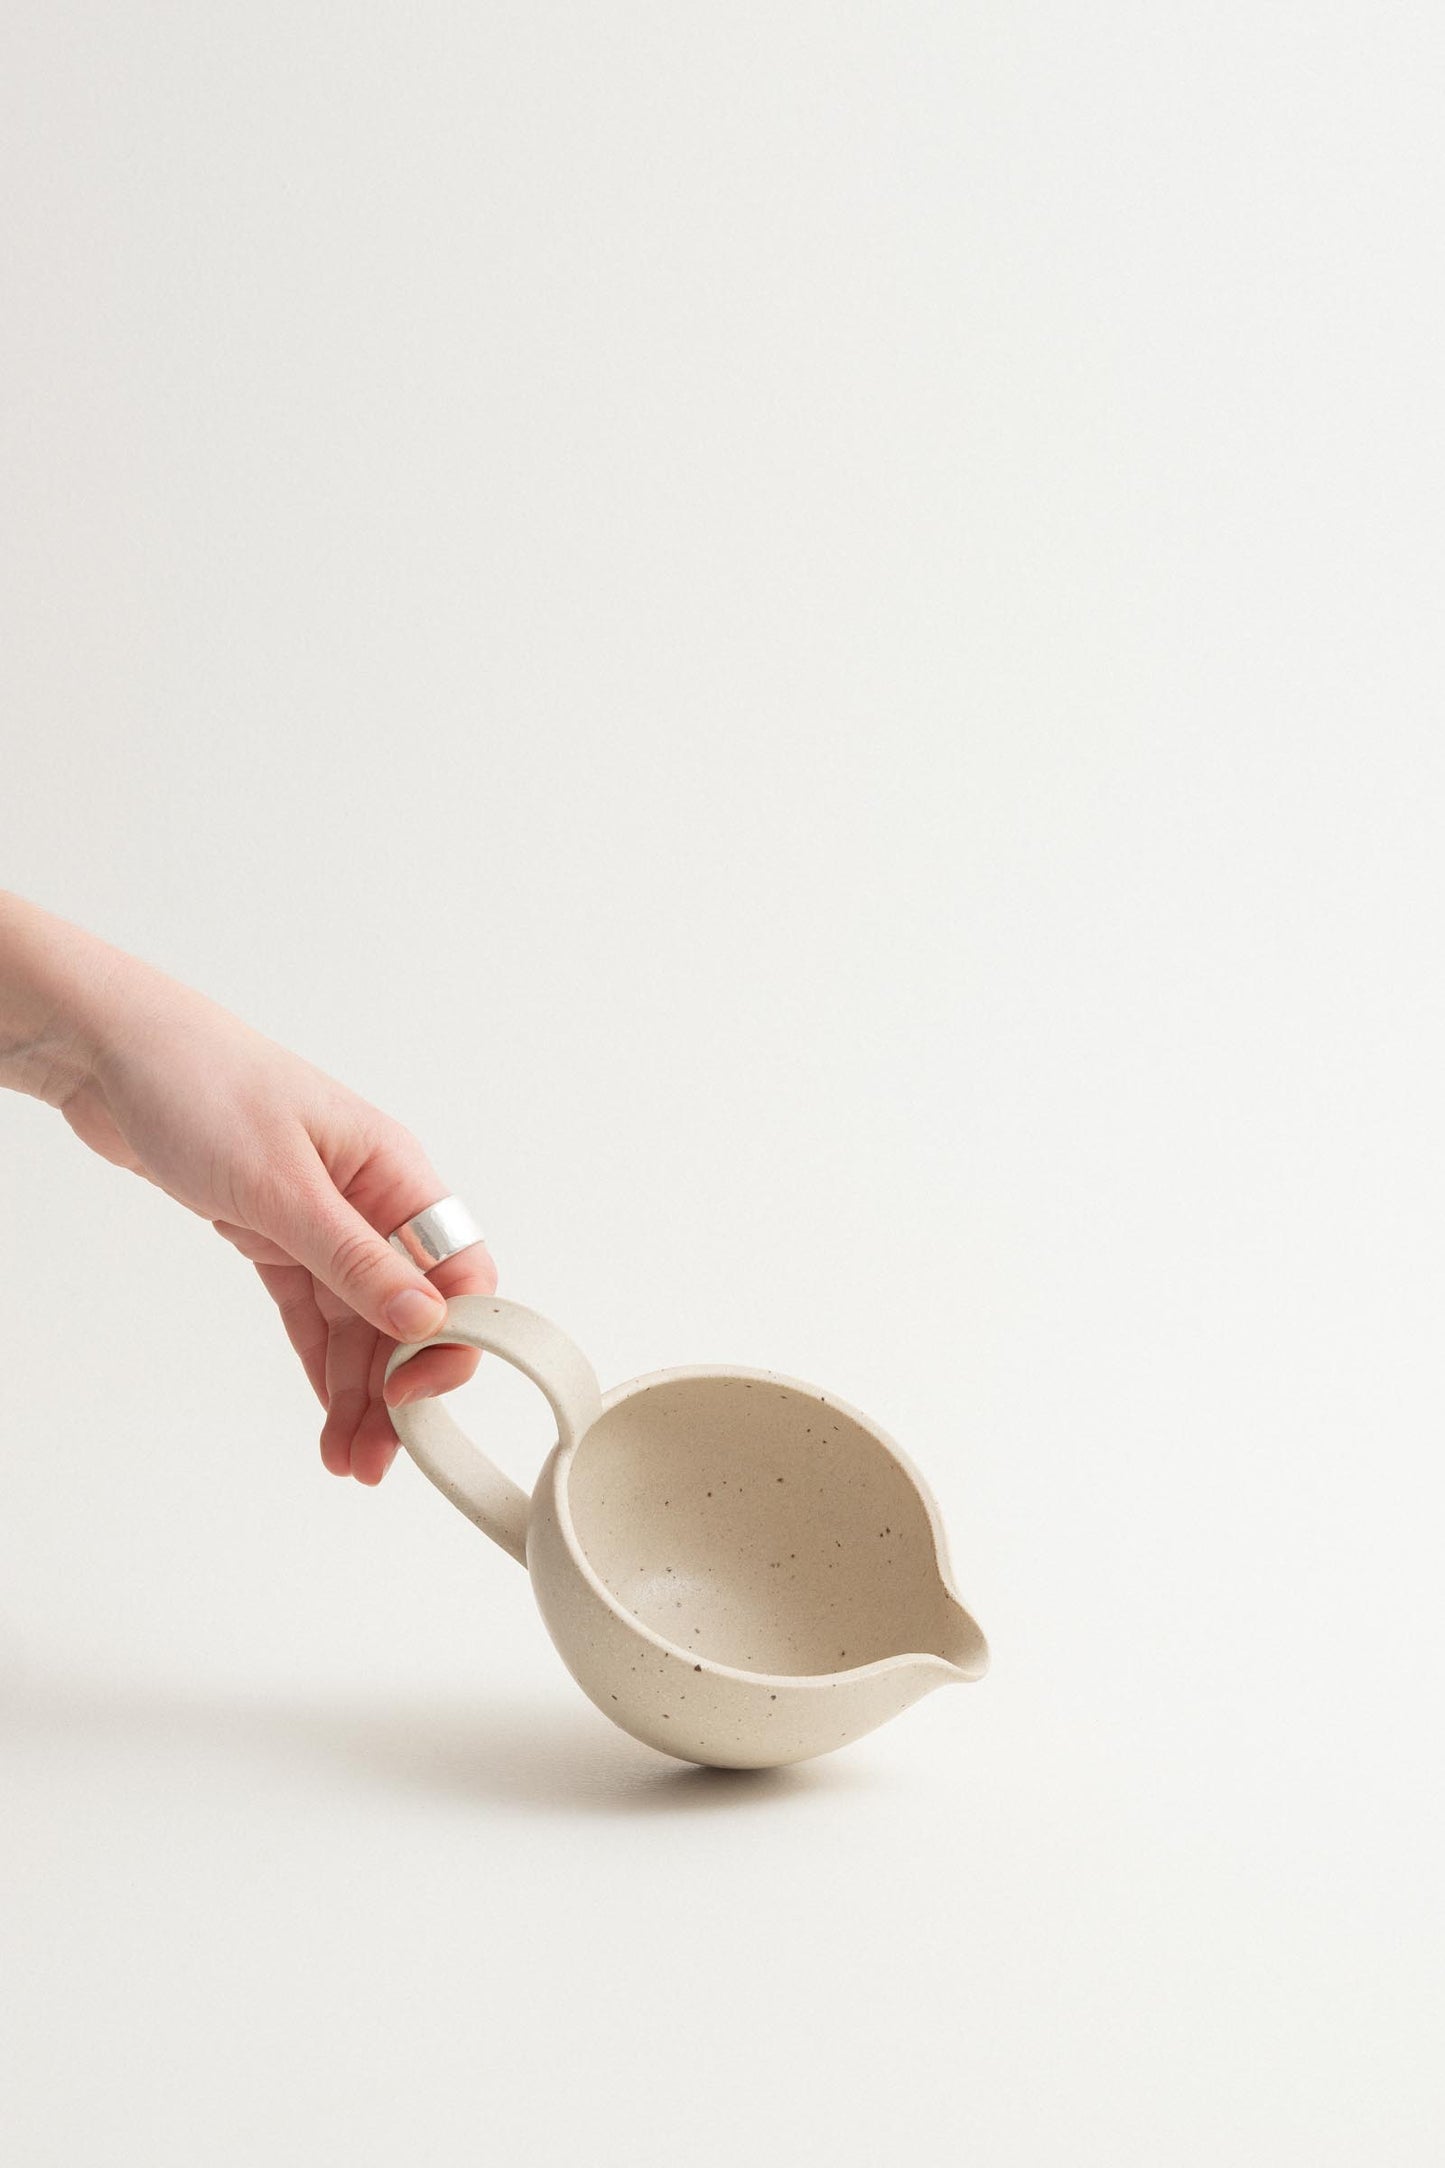 Spouted bowl with handle - Creamy beige